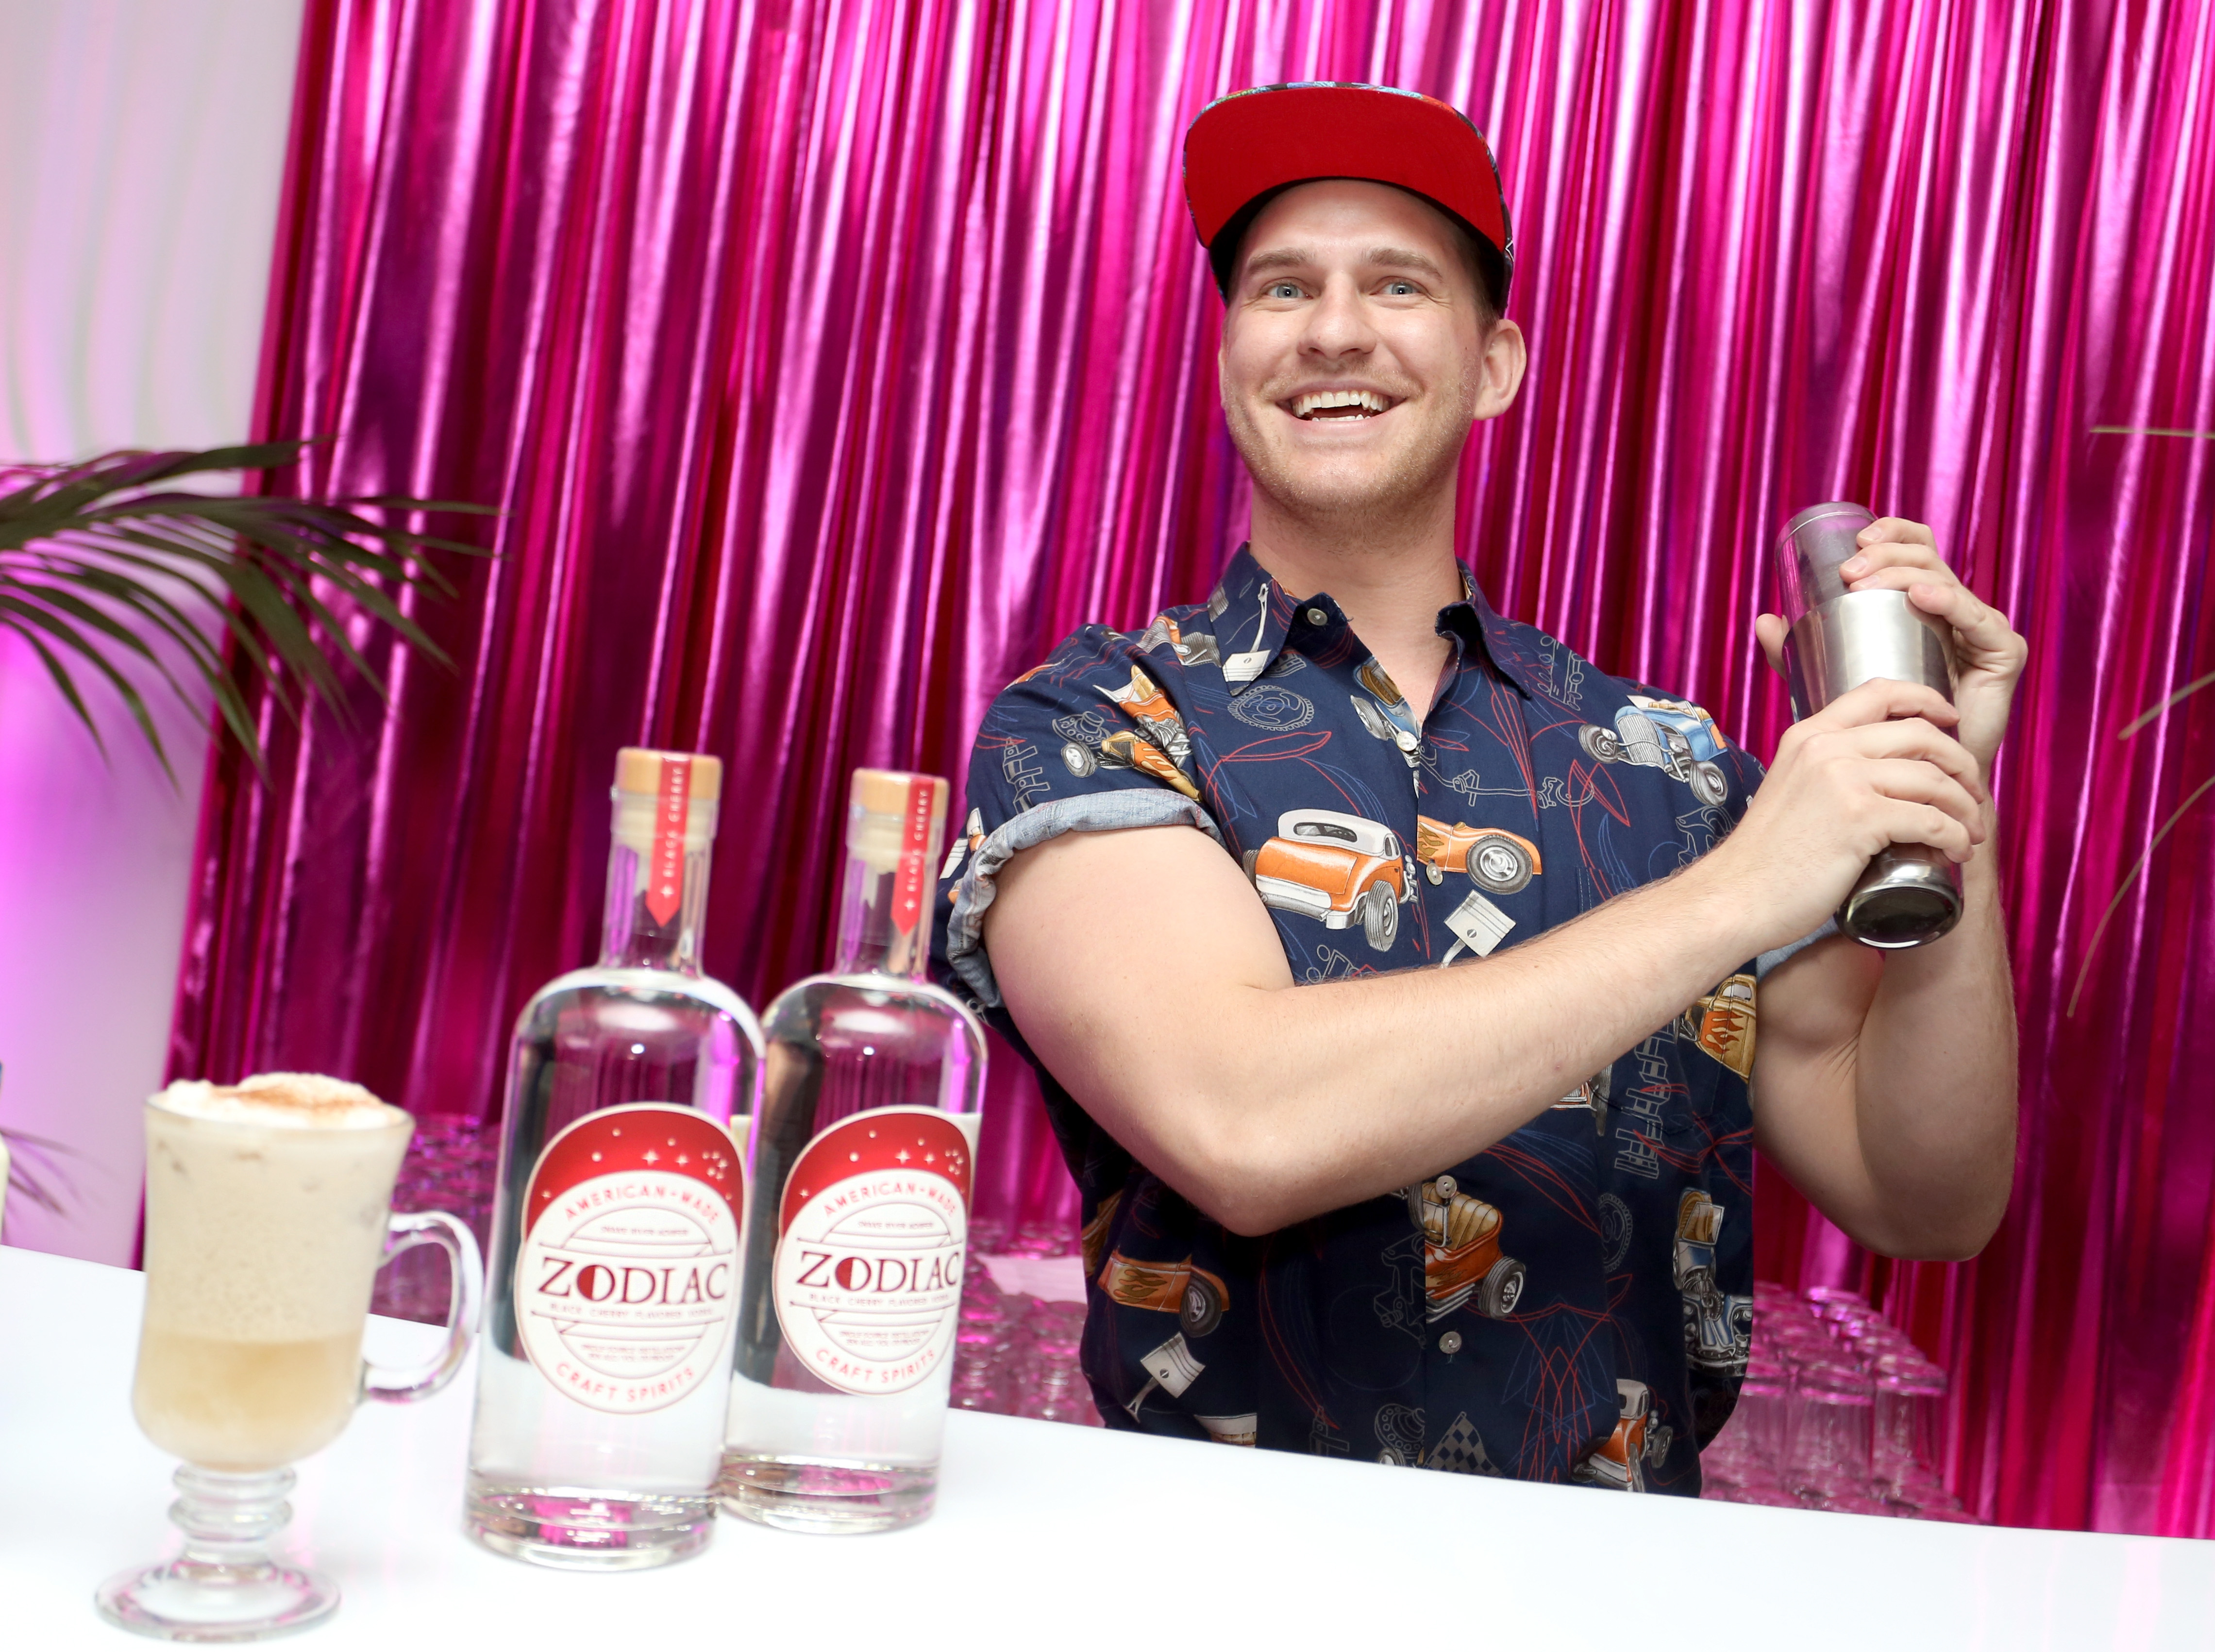 LOS ANGELES, CA - MAY 04:  Bartenders prepare Zodiac Vodka cocktails during an exclusive launch party introducing Zodiac Vodka to the California market, hosted by Zodiac Vodka and Scooter Braun, on May 4, 2015 in Los Angeles, California.  (Photo by Rachel Murray/Getty Images for Zodiac Vodka)